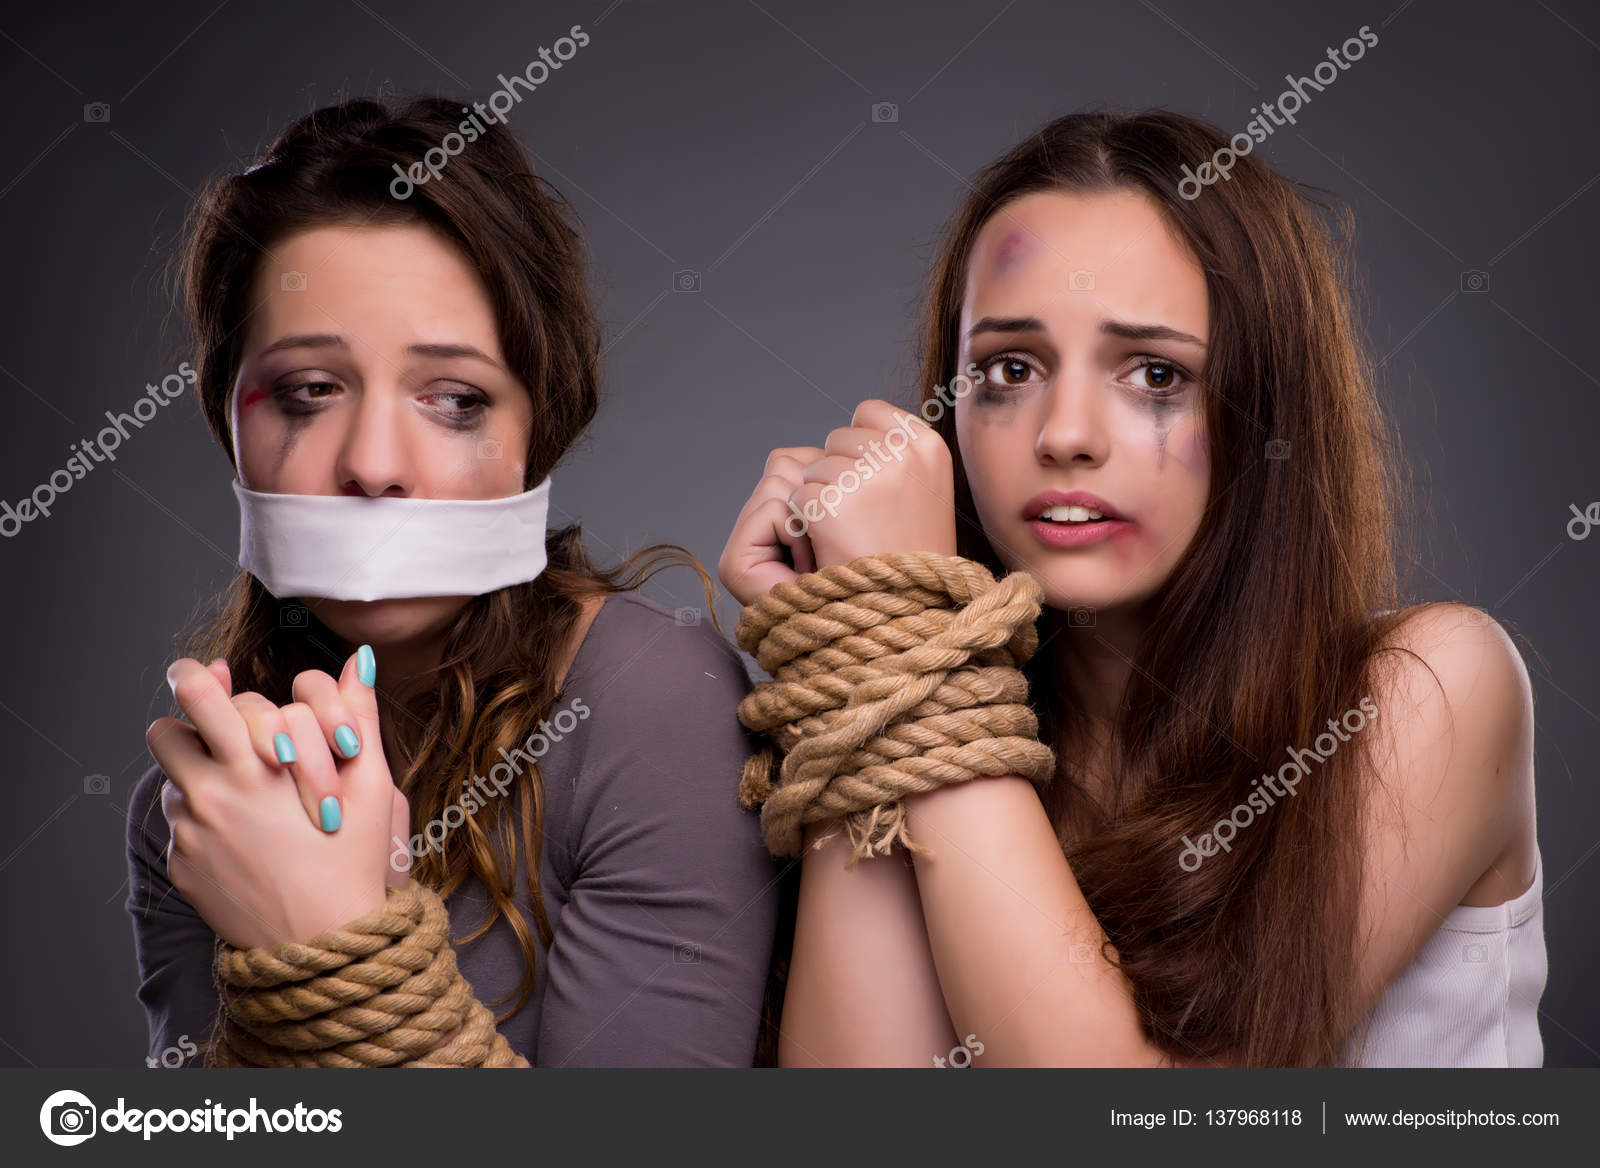 Stock photography ▻ Woman in violence and discrimination concept ◅ 13796811...